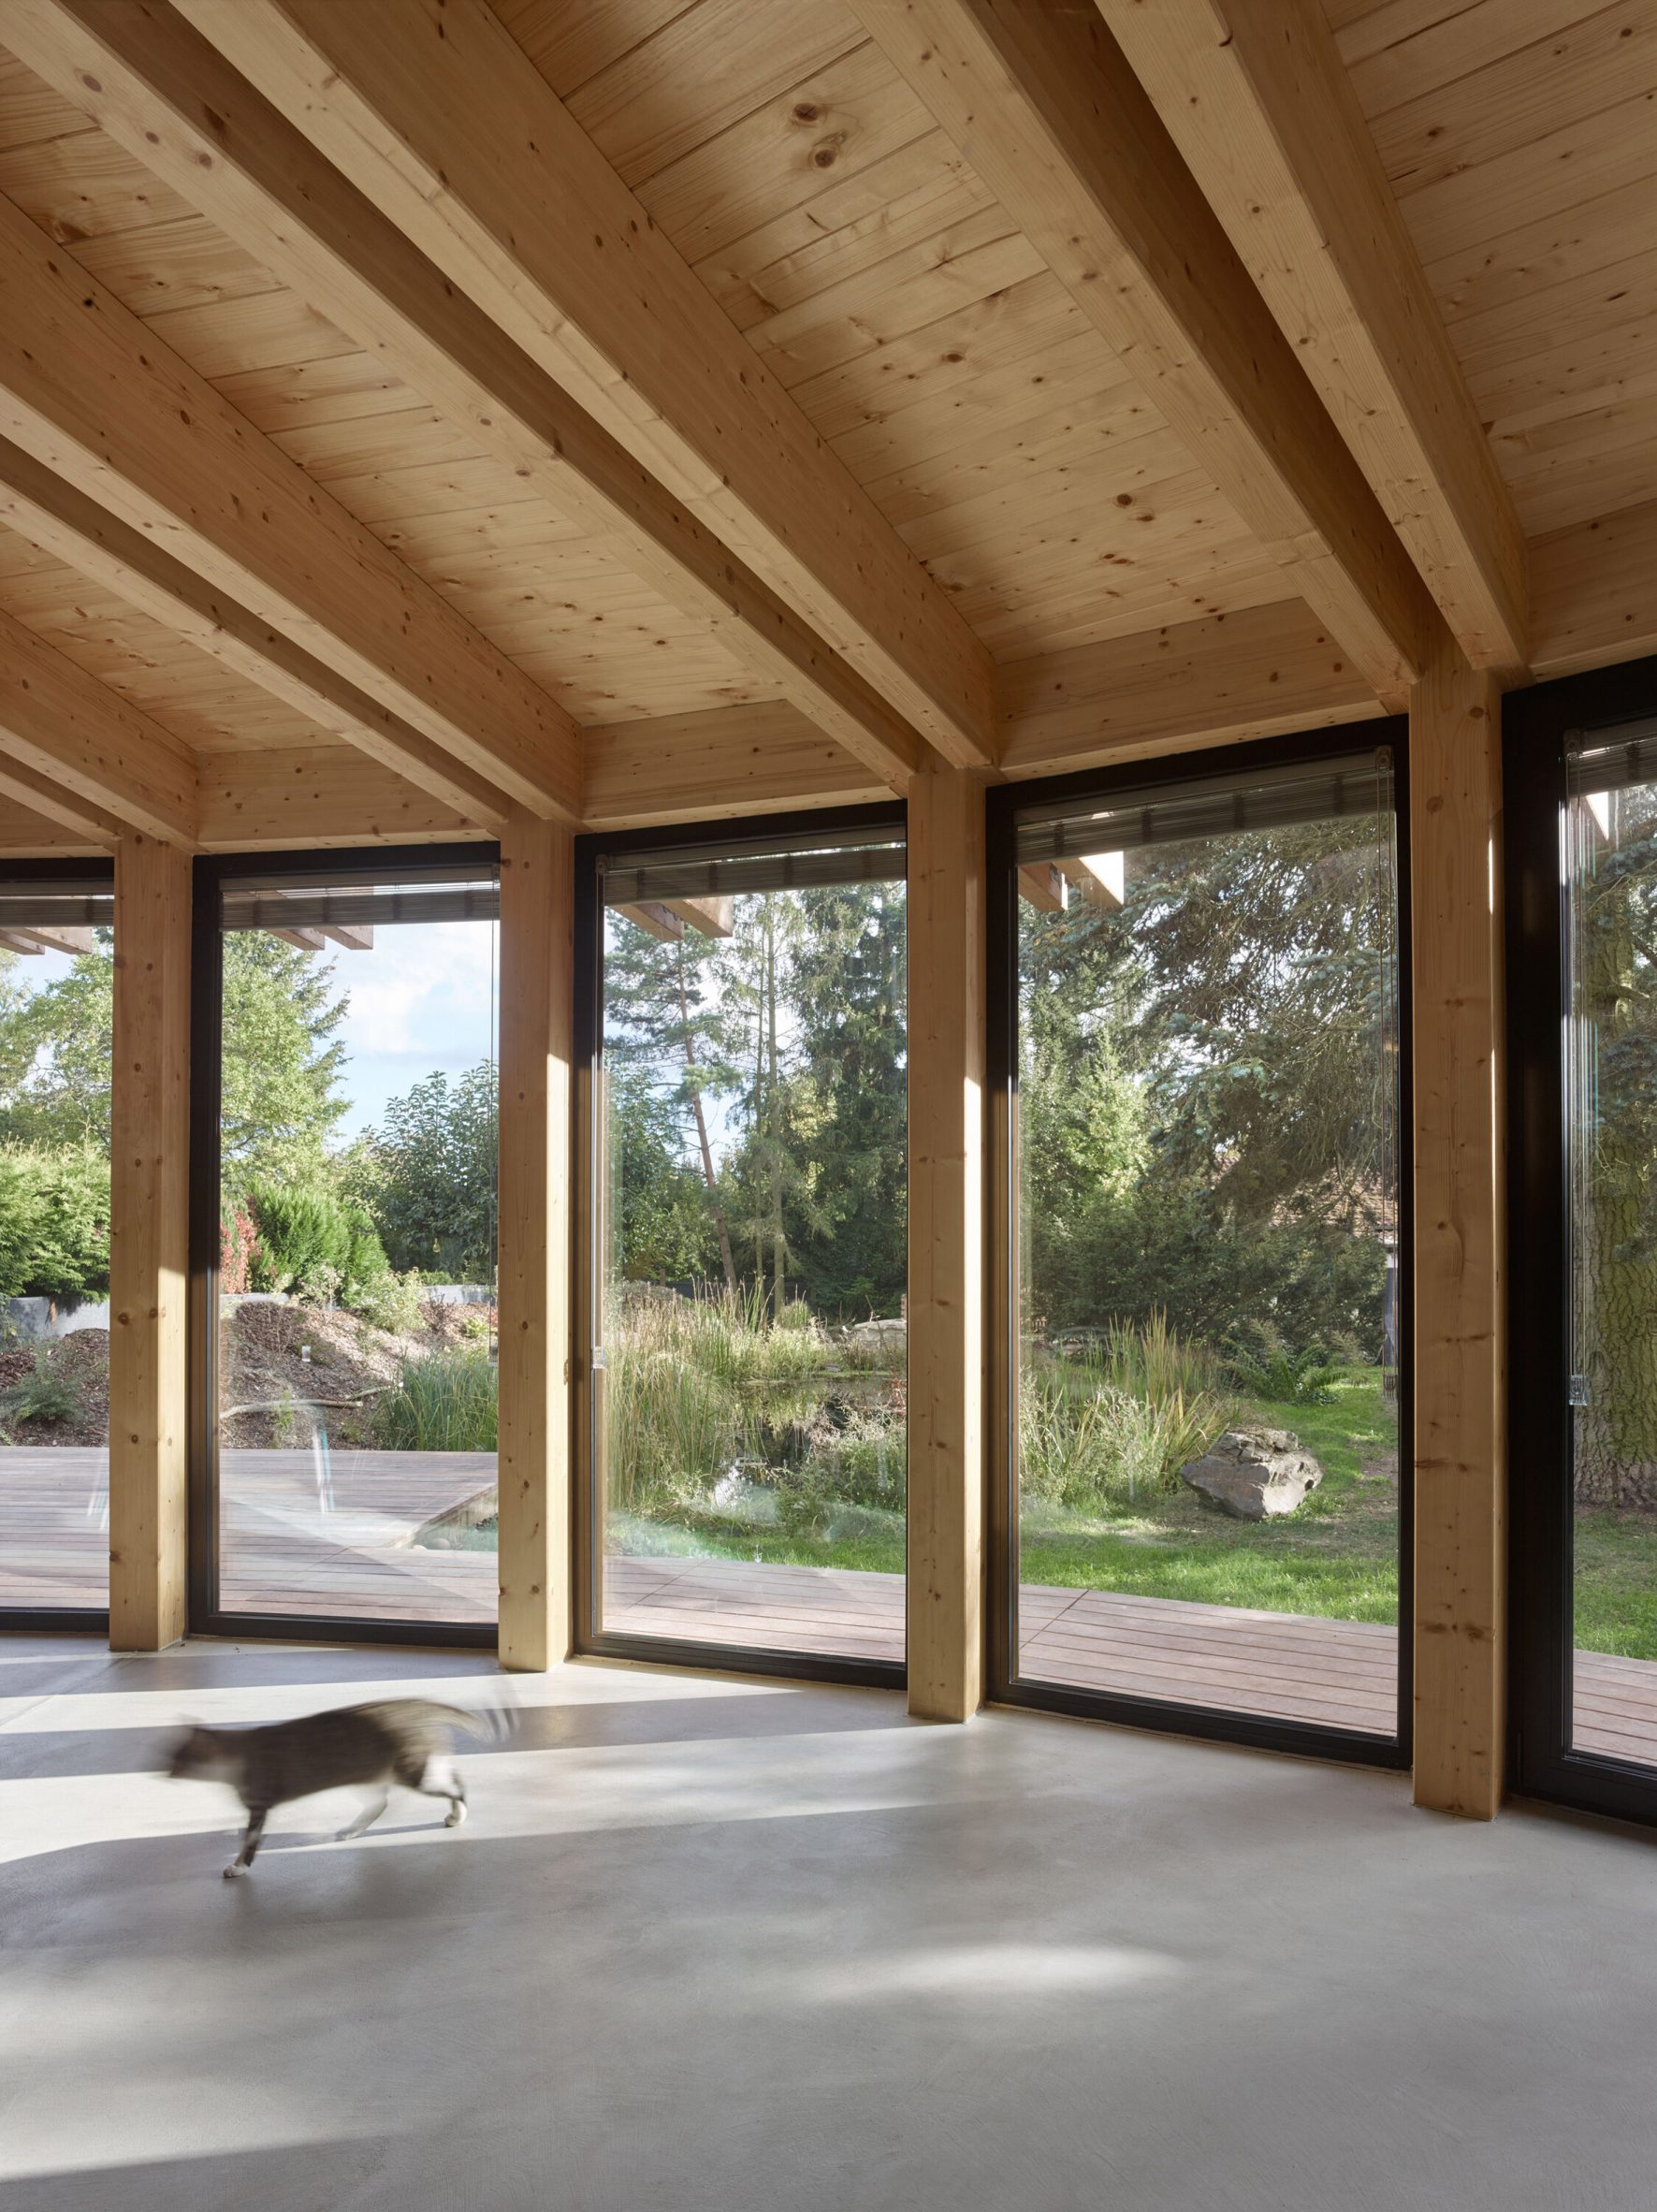 Interior image of the curving windows at House that Opens up to the Sun